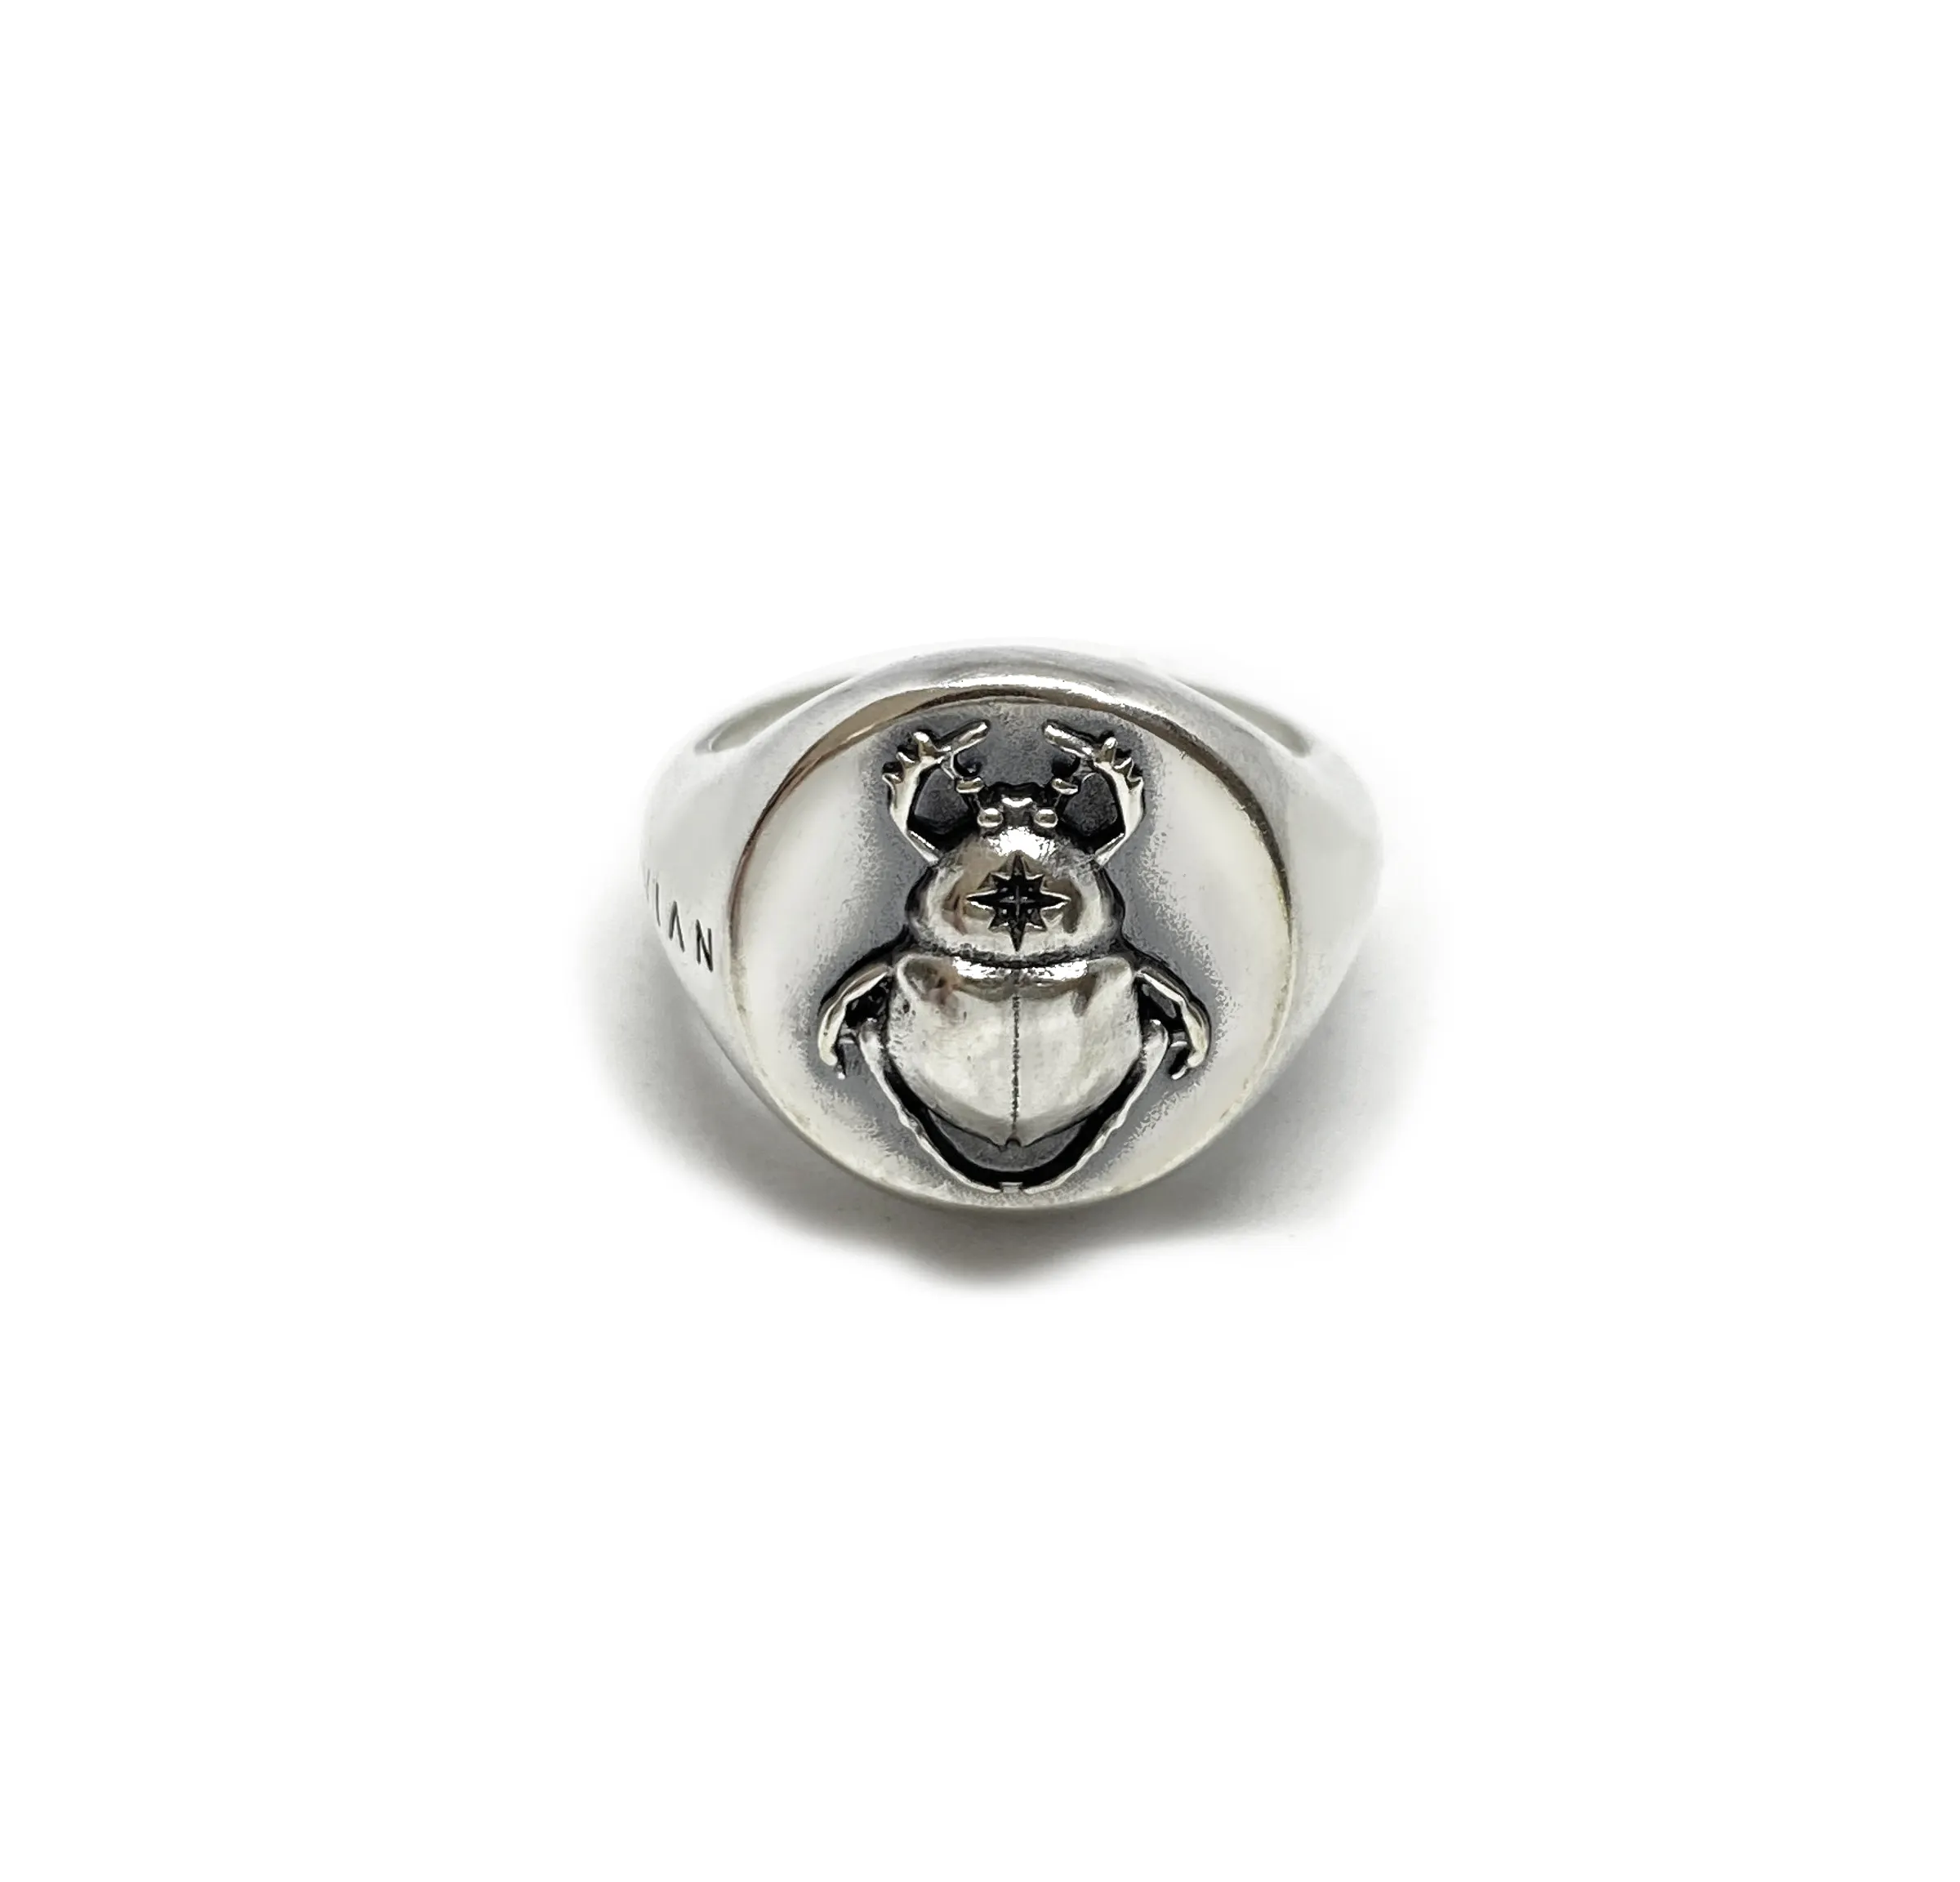 High quality Italian Beetle ring made by 925 sterling silver for fashion events